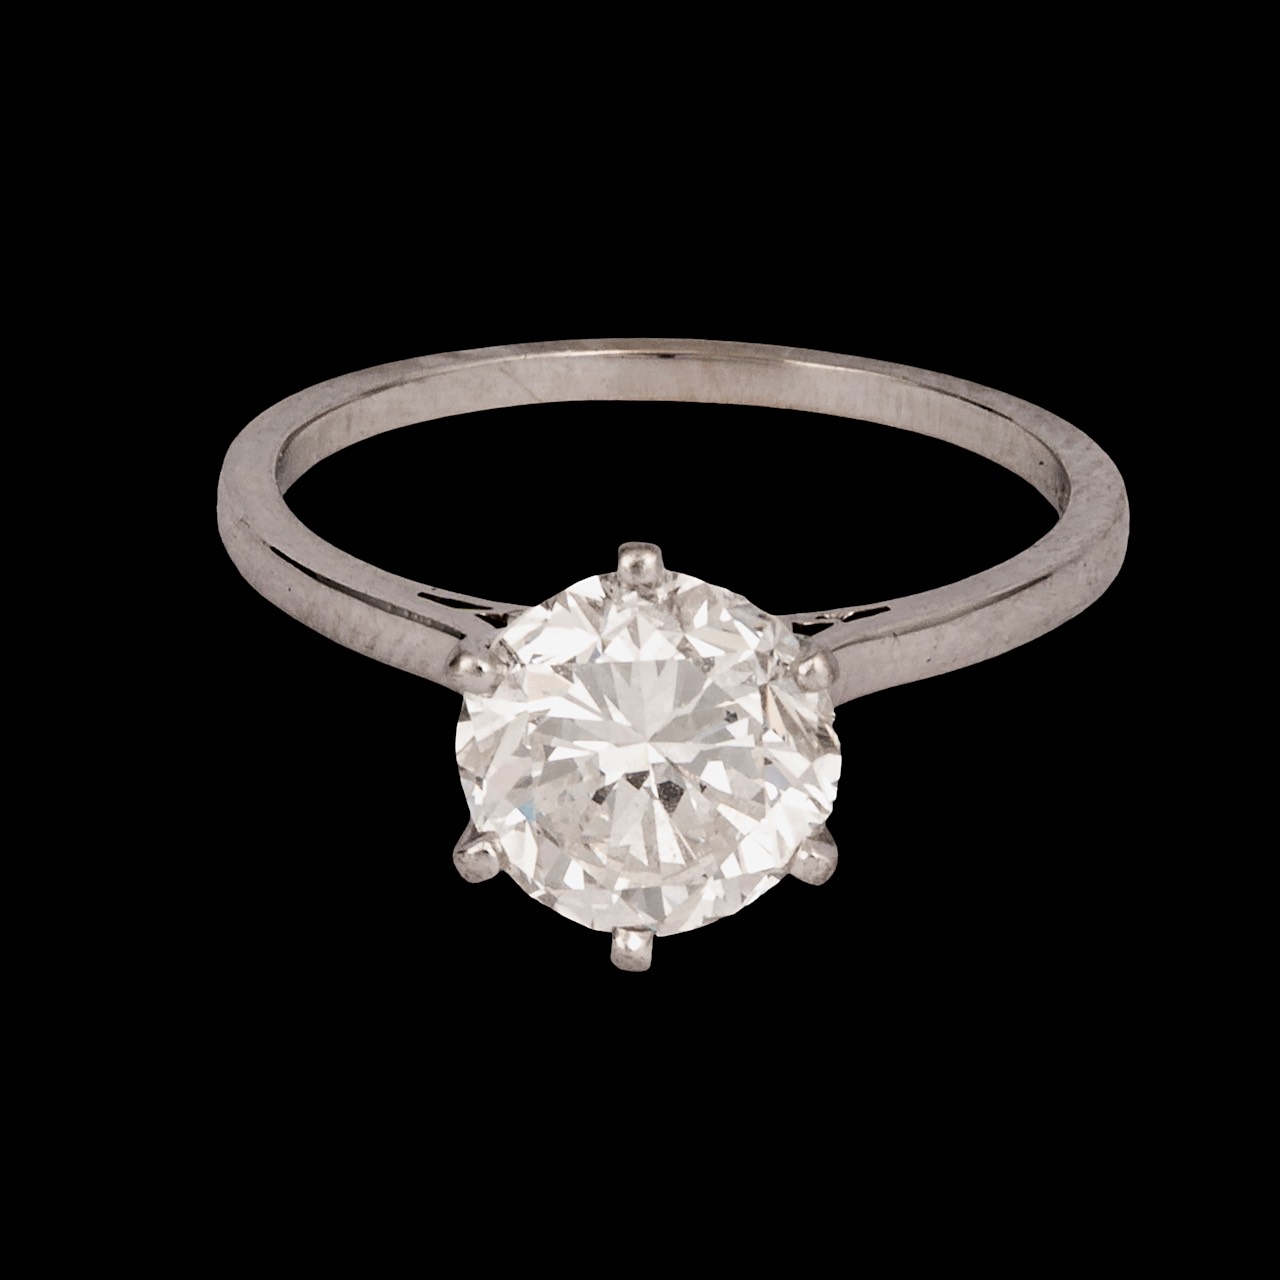 A fine 18ct white gold solitaire ring set with a 2,74 ct brilliant cut diamond - Image 2 of 5